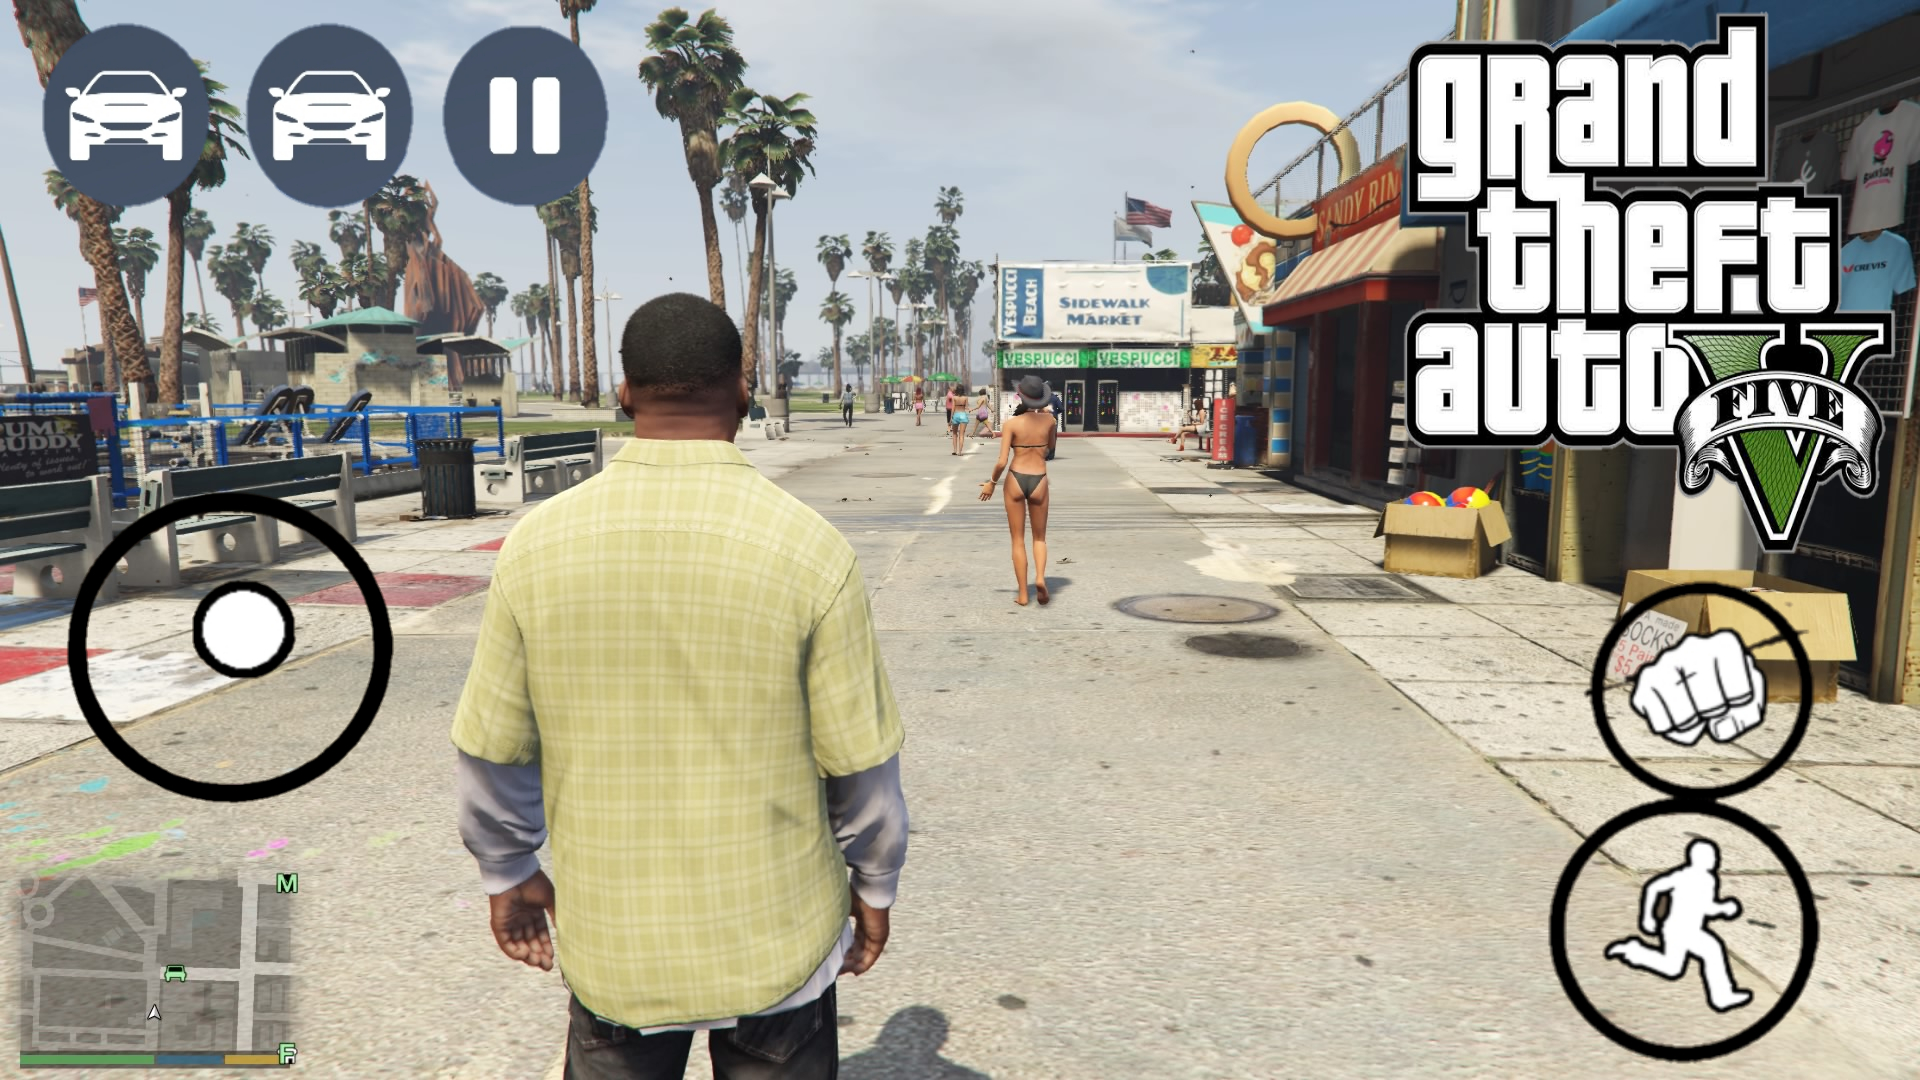 Gta 5 mobile android download for mobile фото 21